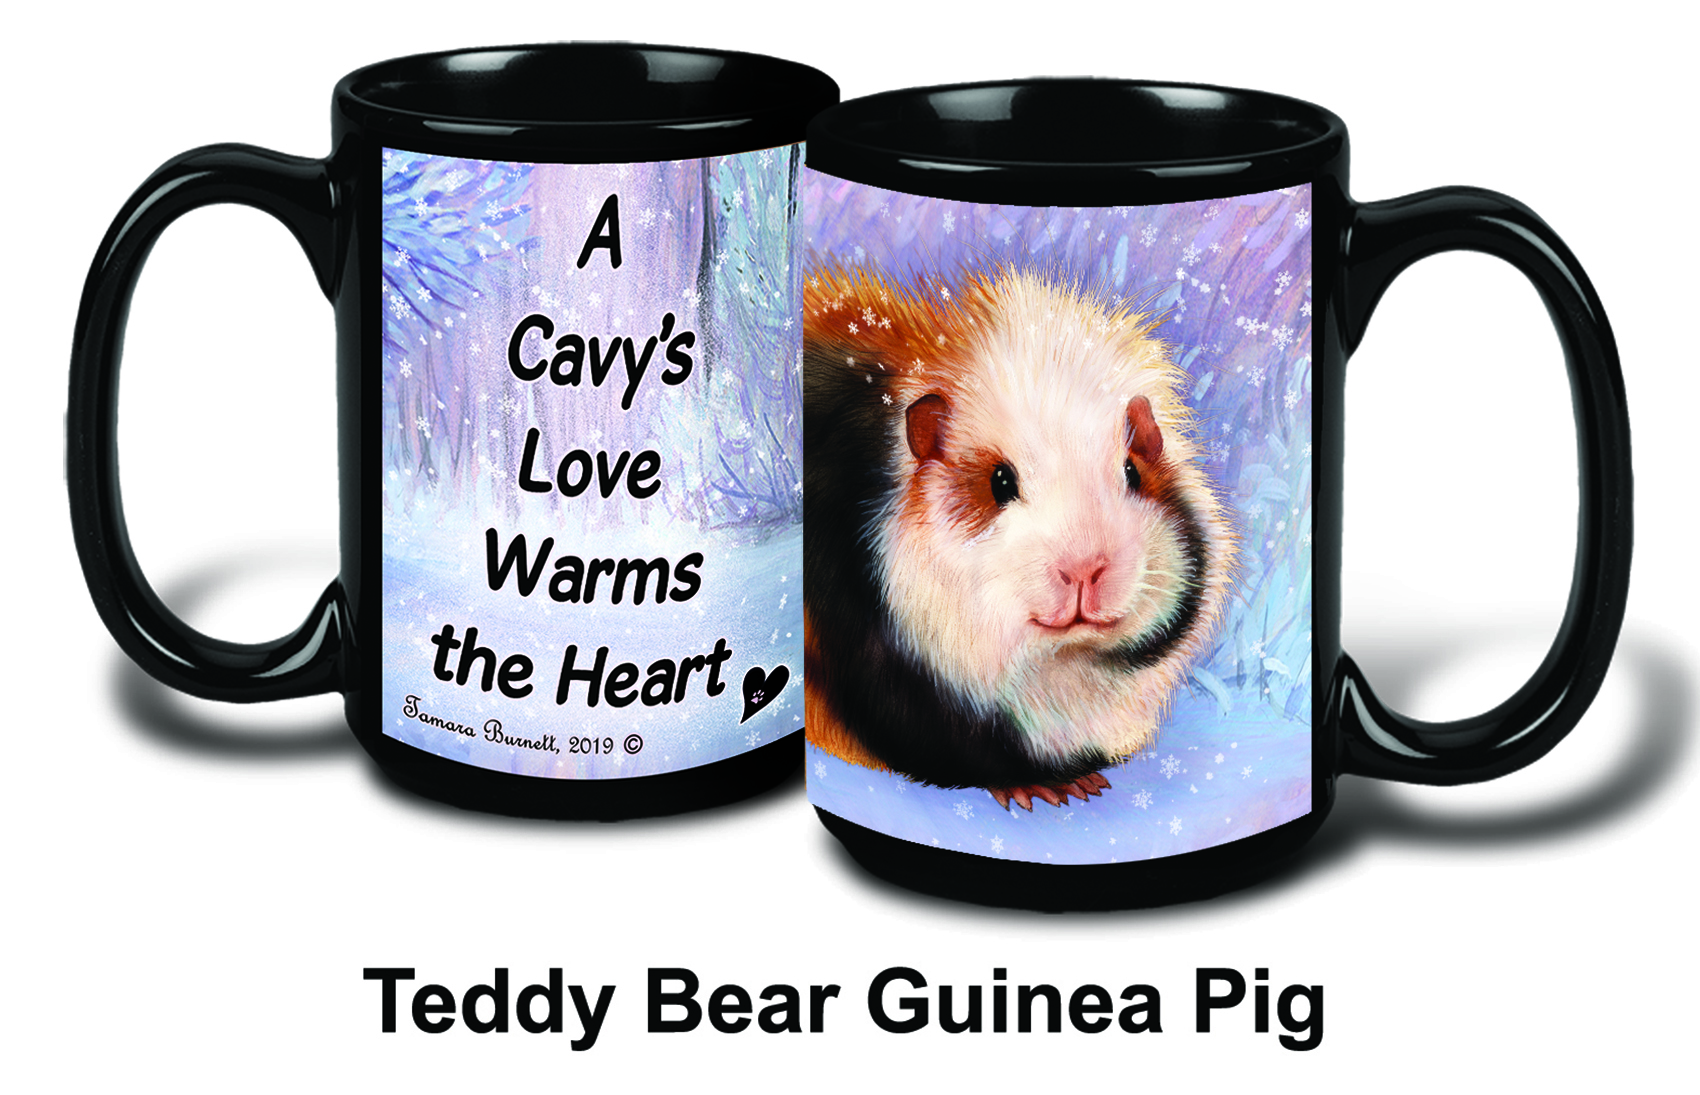 An image of the Guinea Pig Teddy Winter Mugs